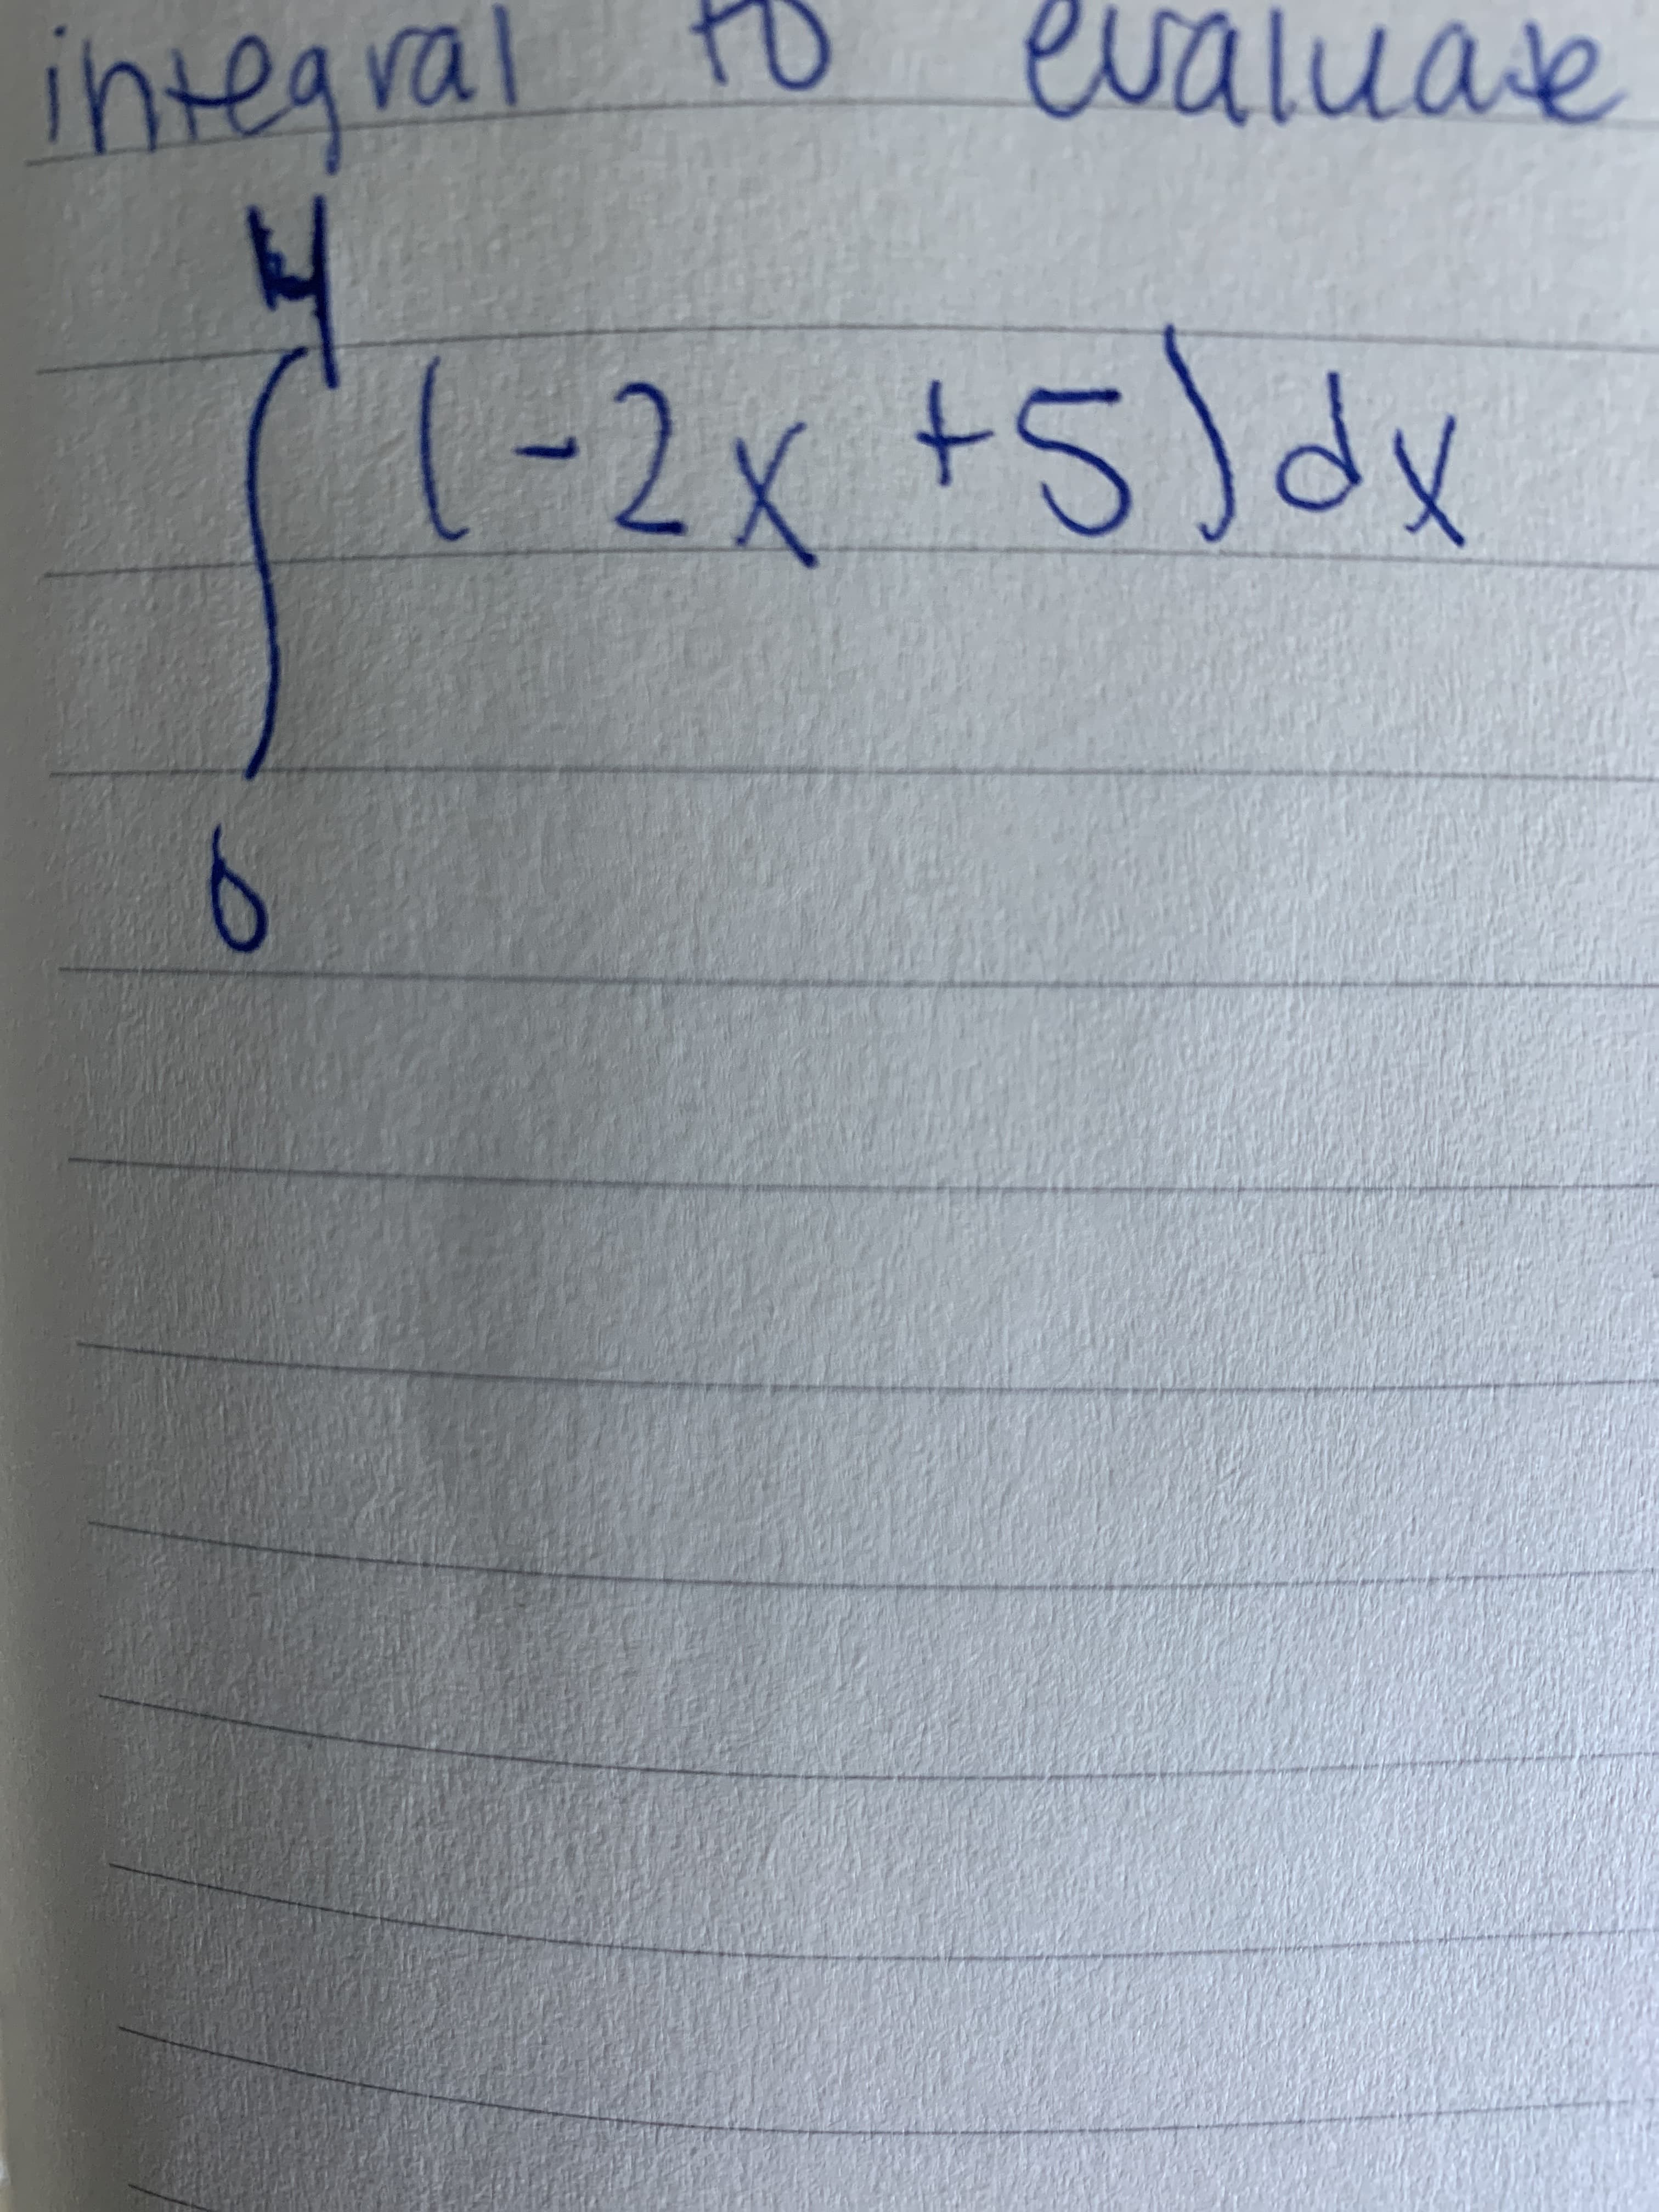 integral
to
evaluate
(1-2x +5)dx
6.
